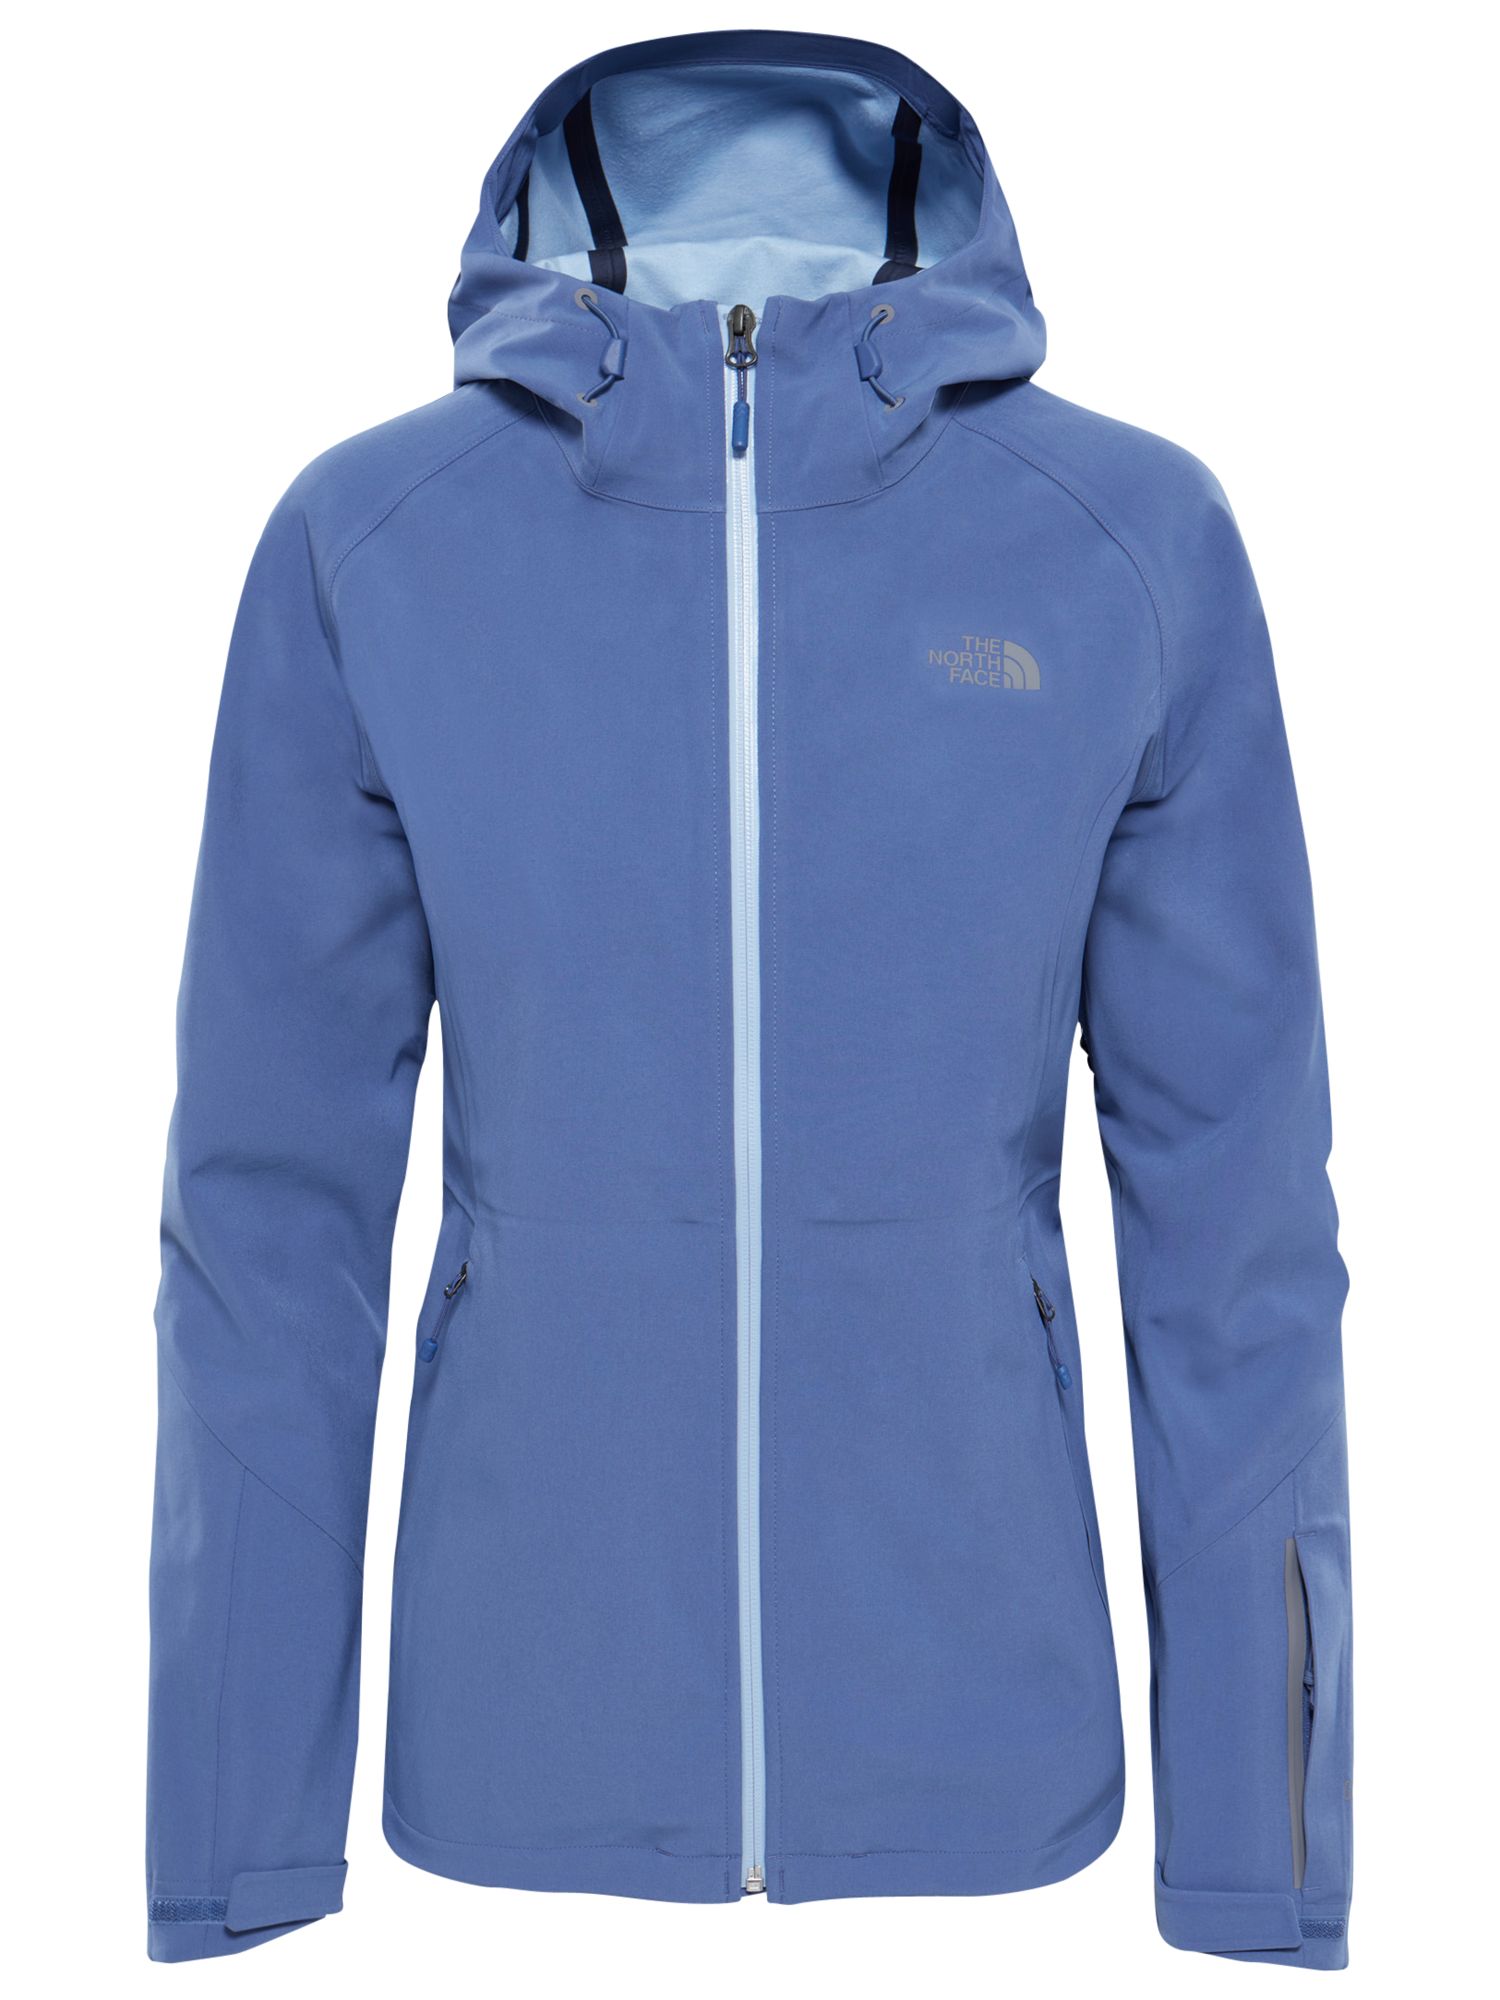 The North Face Apex Women's Jacket, Blue at John Lewis & Partners